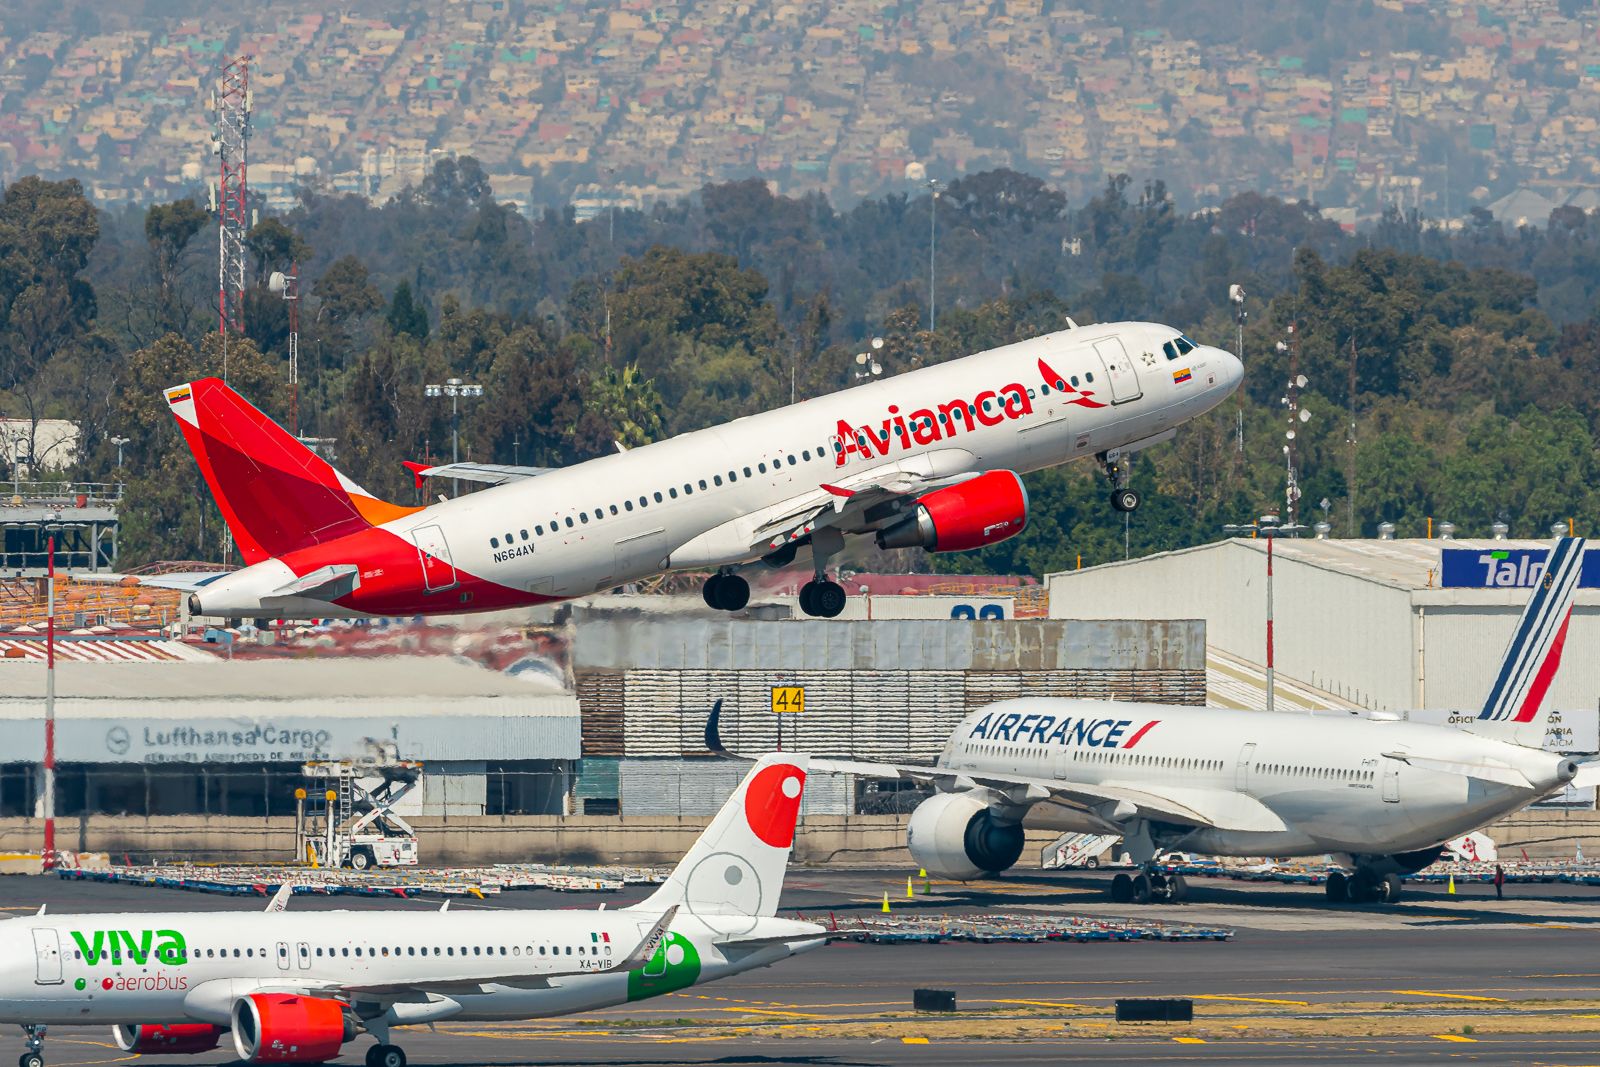 An Avianca aircraft departing from Mexico City. In the back, a Viva Aerobus aircraft can be seen taxiing and an Air France aircraft can be seen parked. 